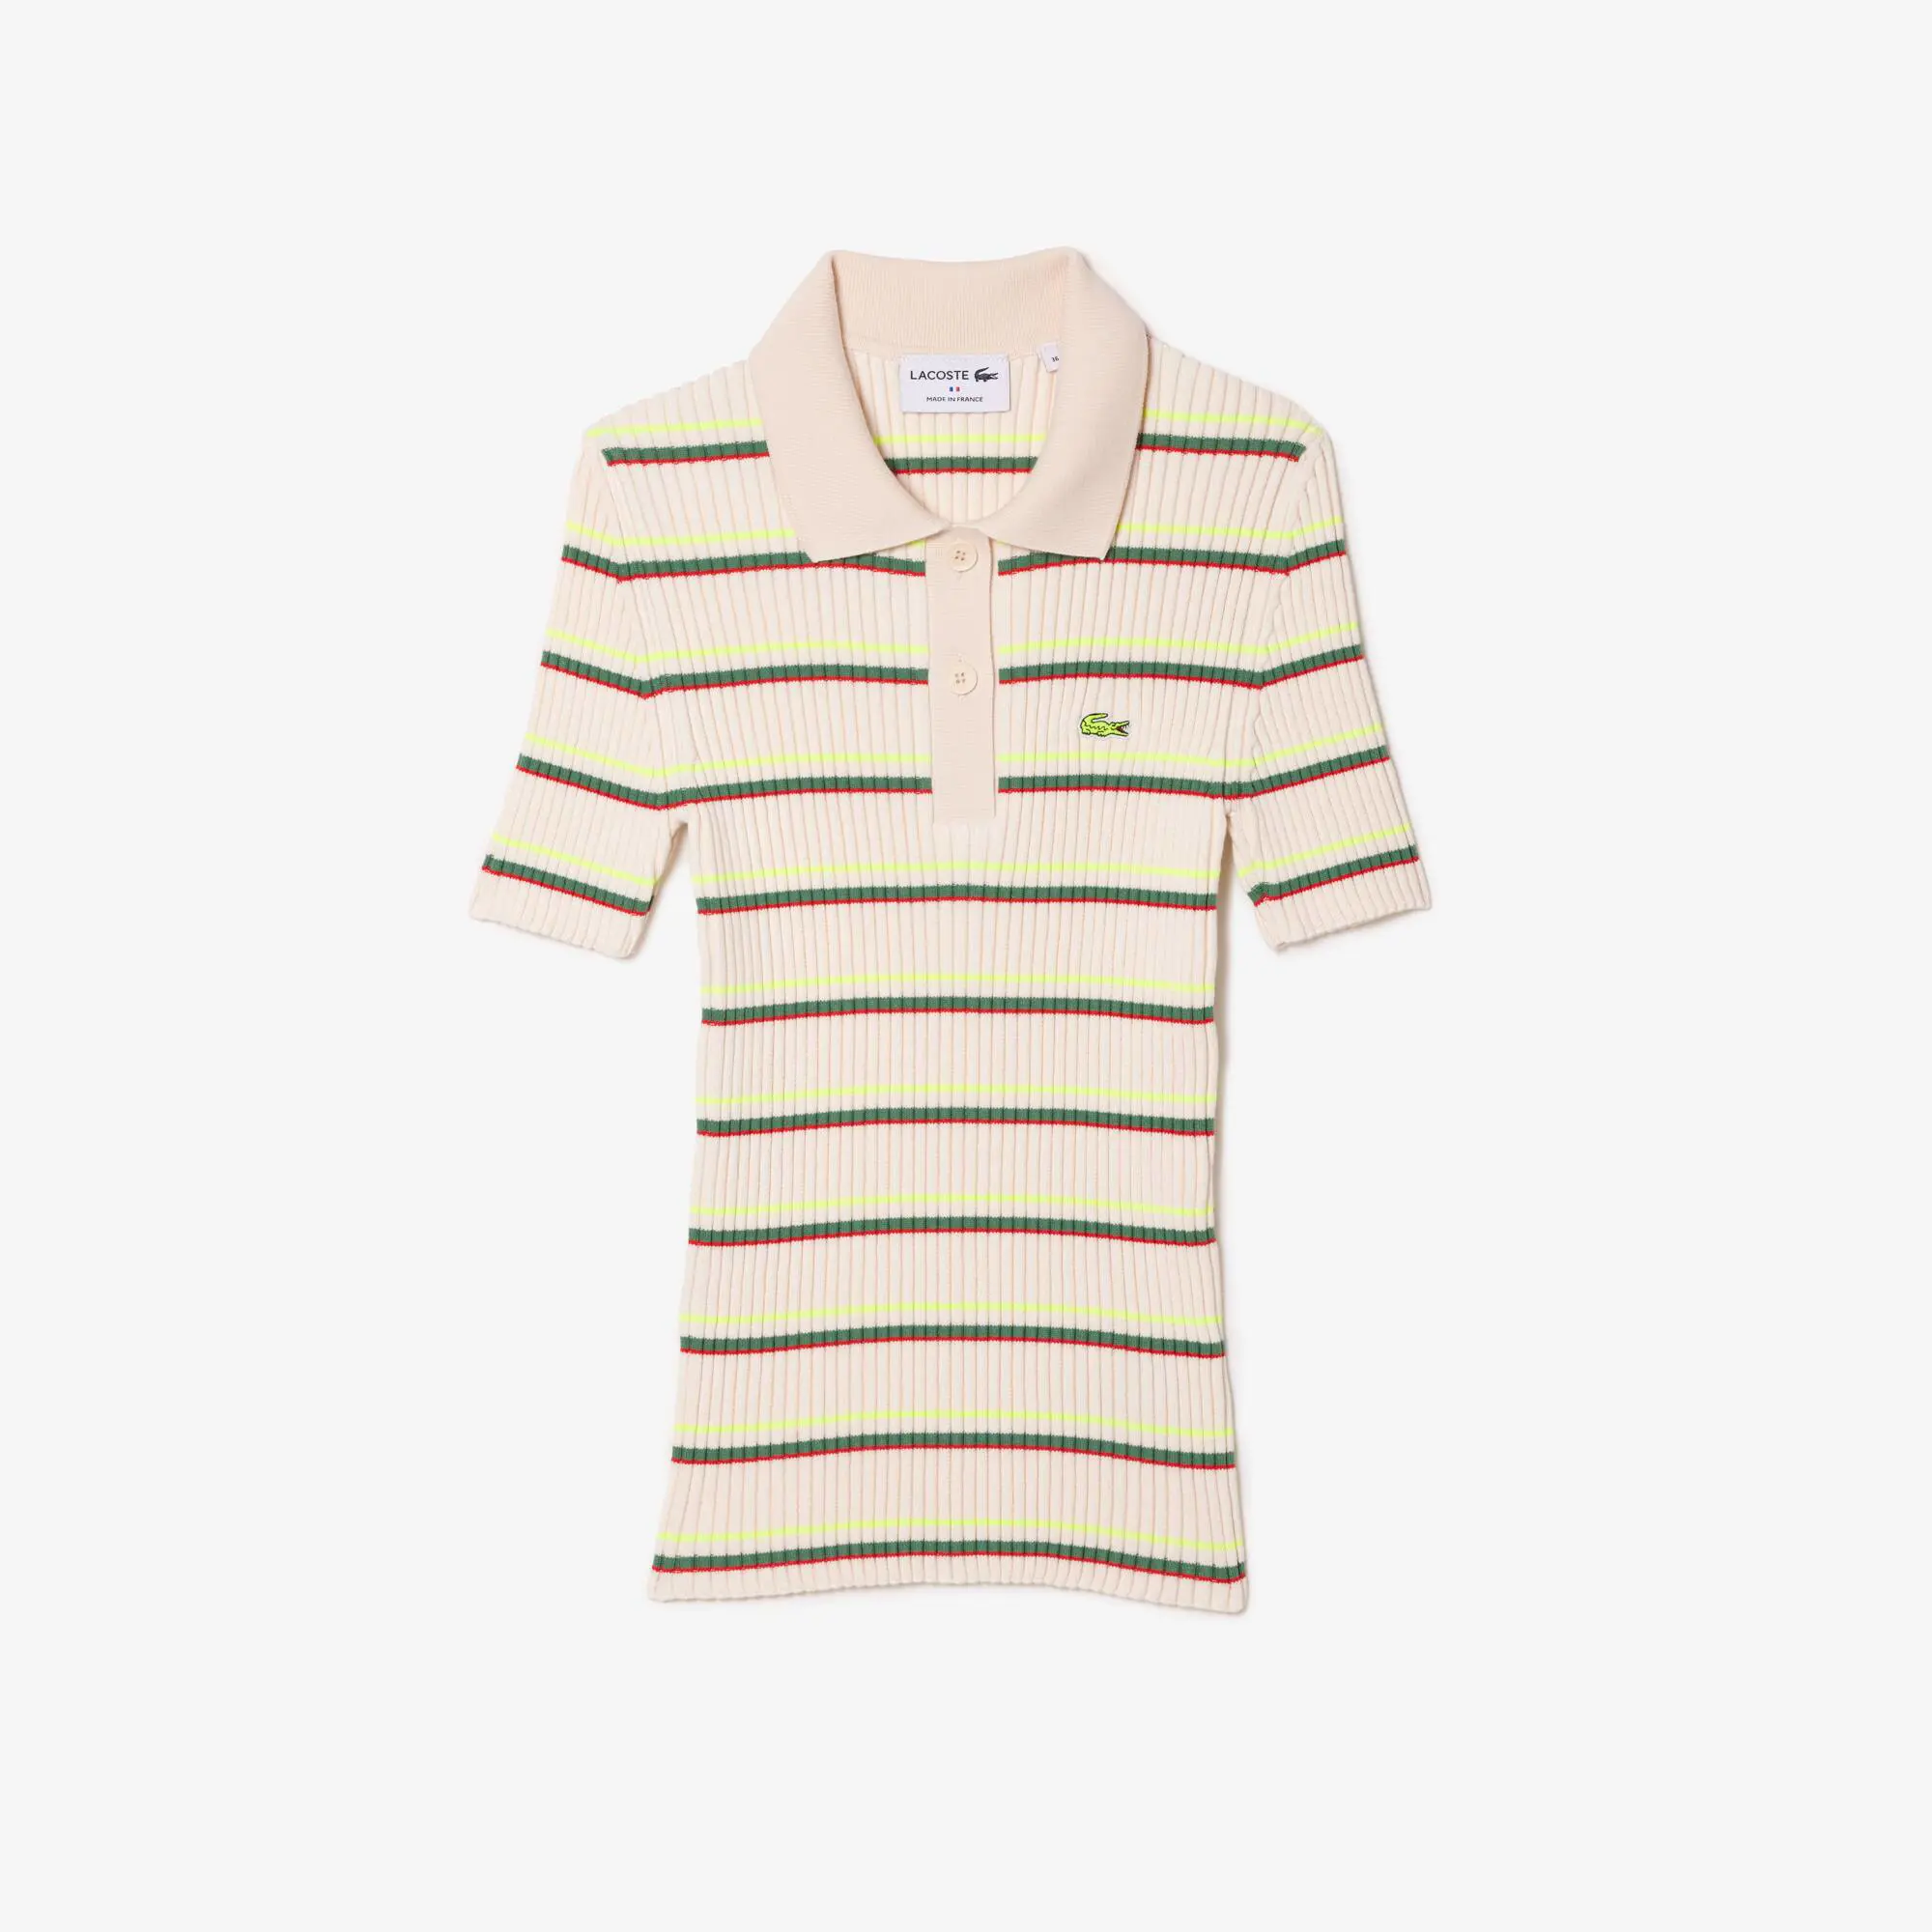 Lacoste Women’s Made In France Organic Cotton Striped Polo. 2